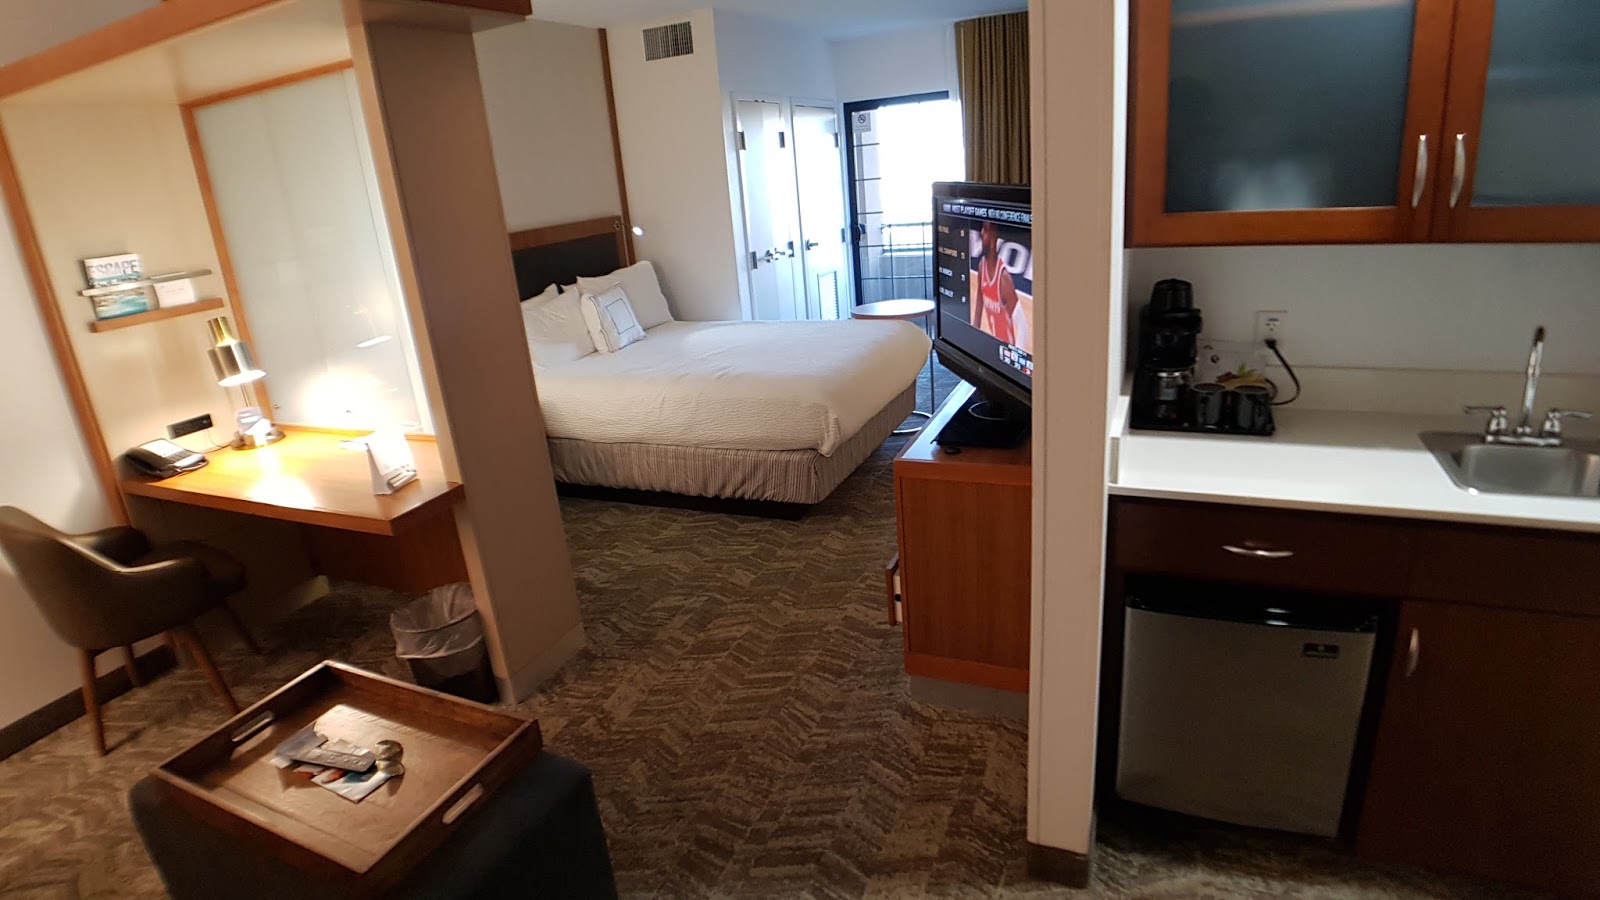 5th Stay：SpringHill Suites Madera